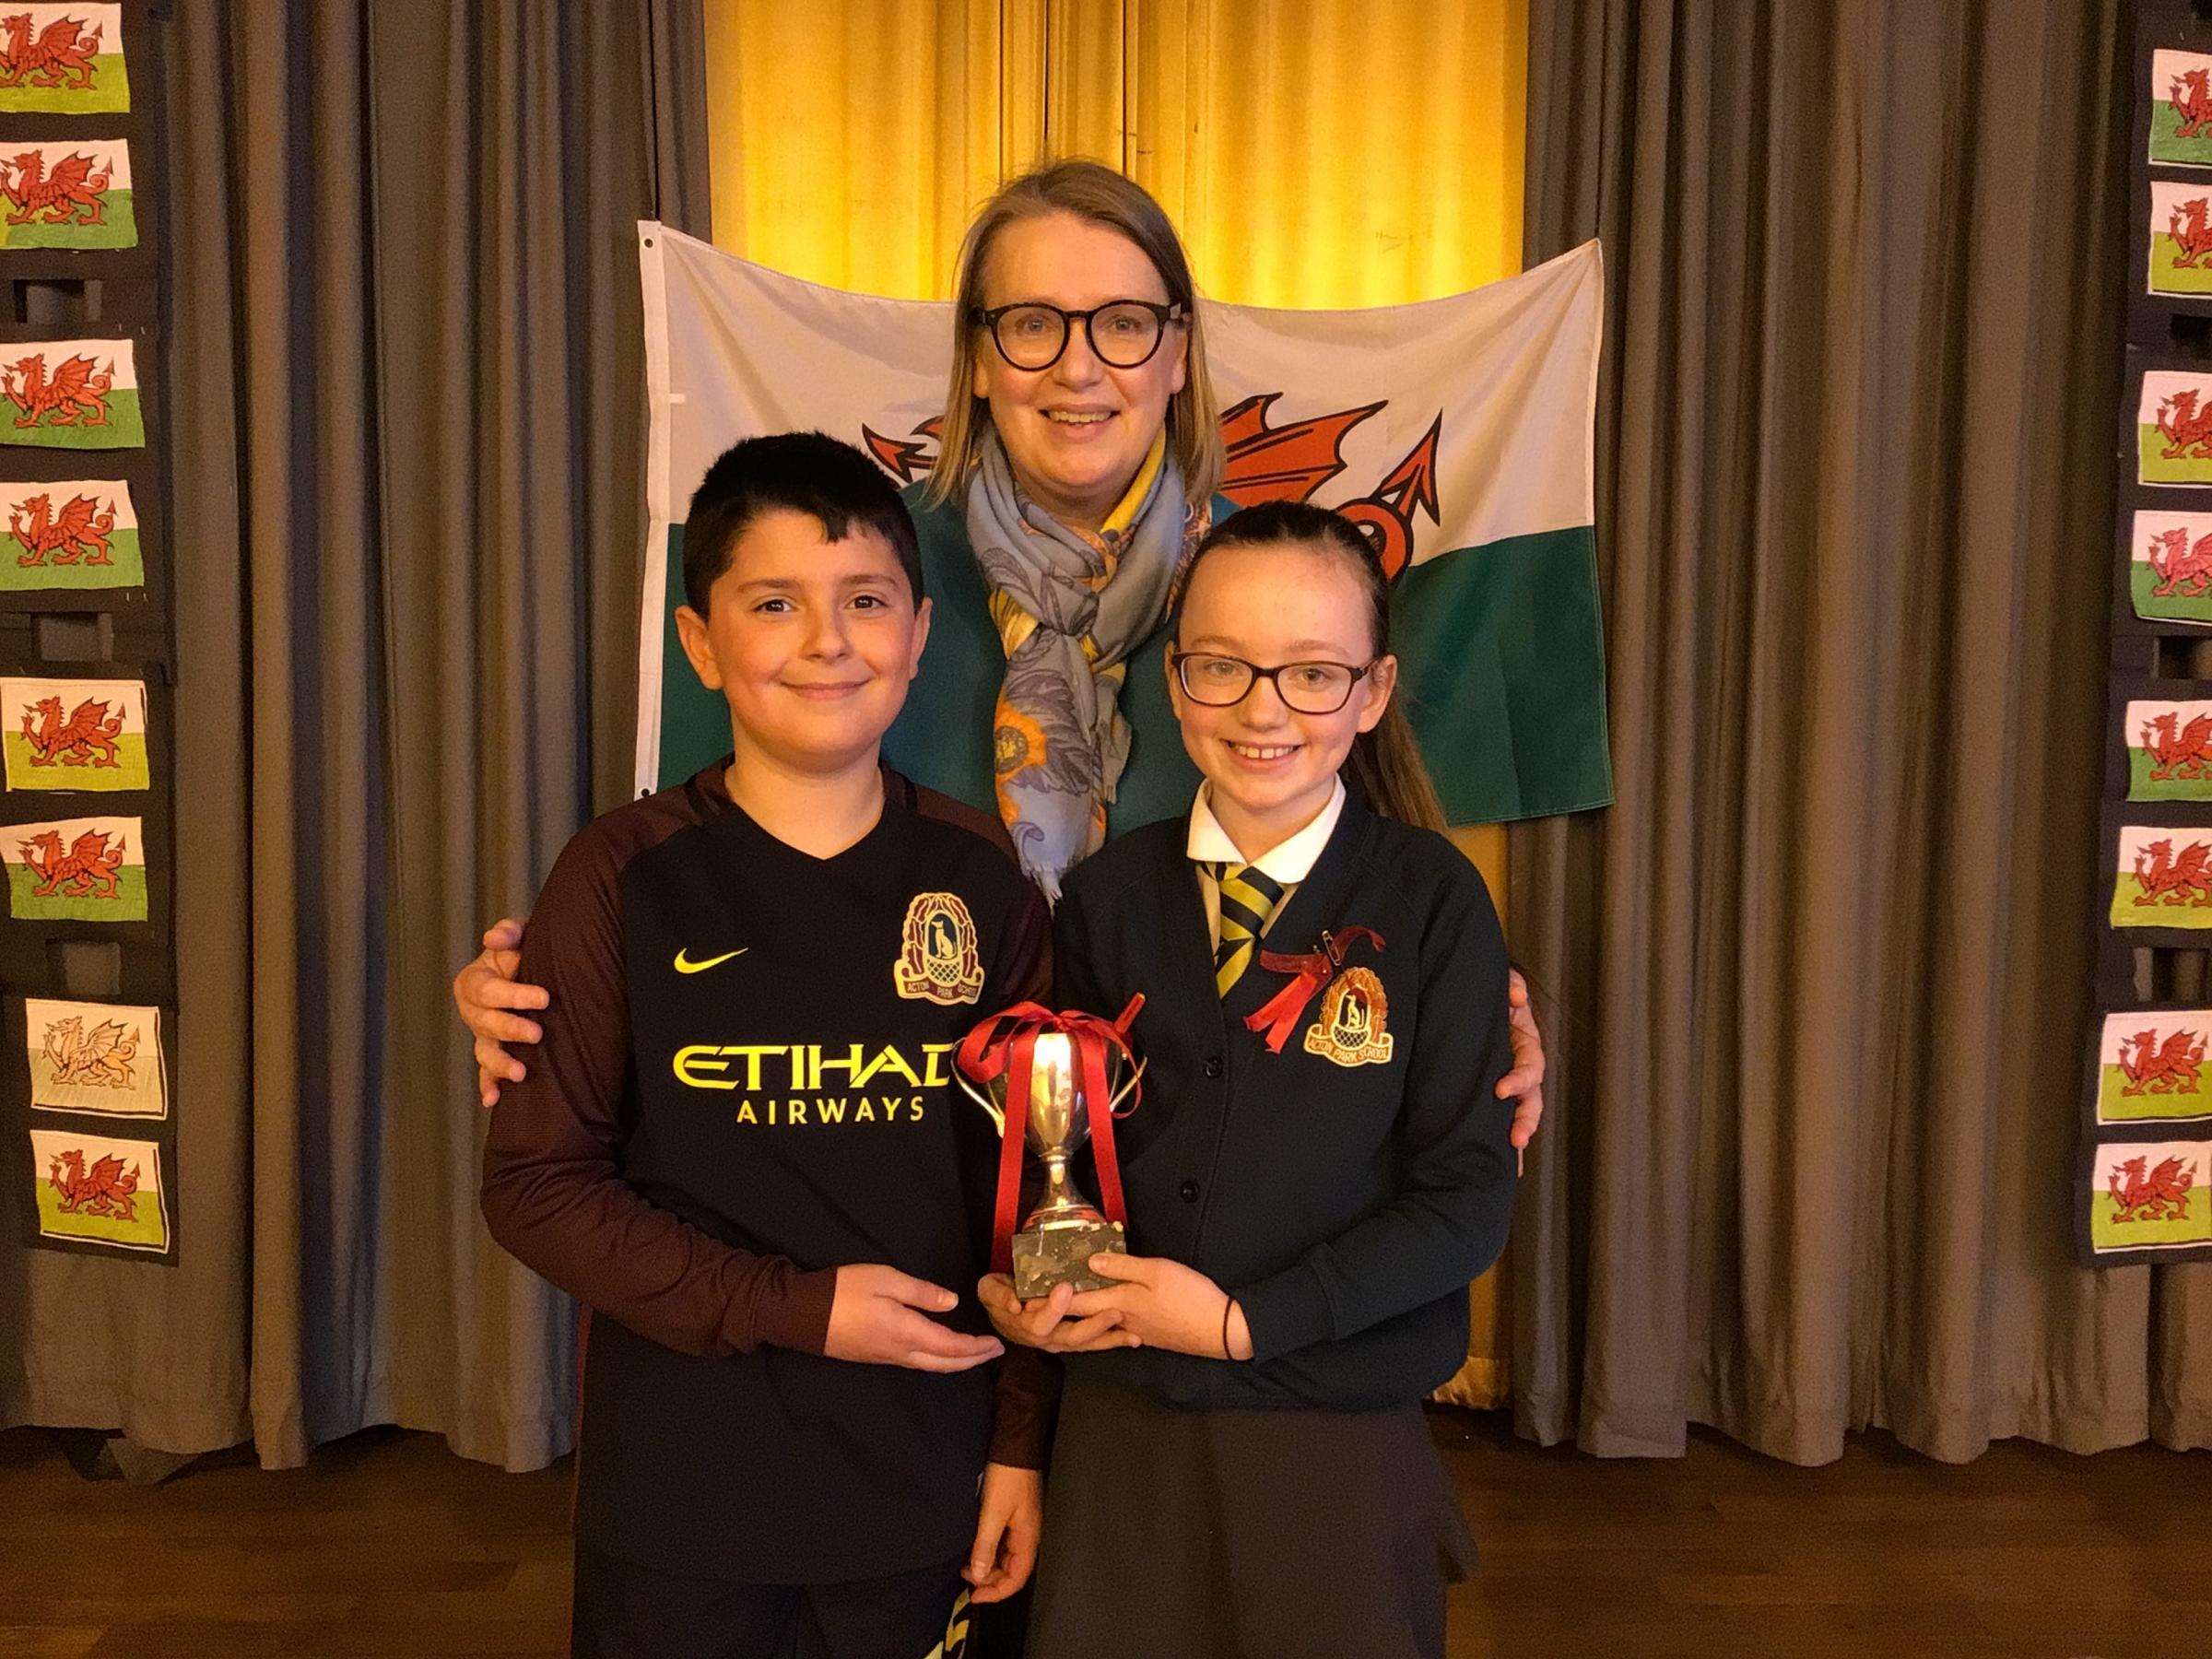 Dyfrdwy house captains Mihaile Tinaise and Peyton Grace Price, receiving the cup from headteacher Jo Grundy.